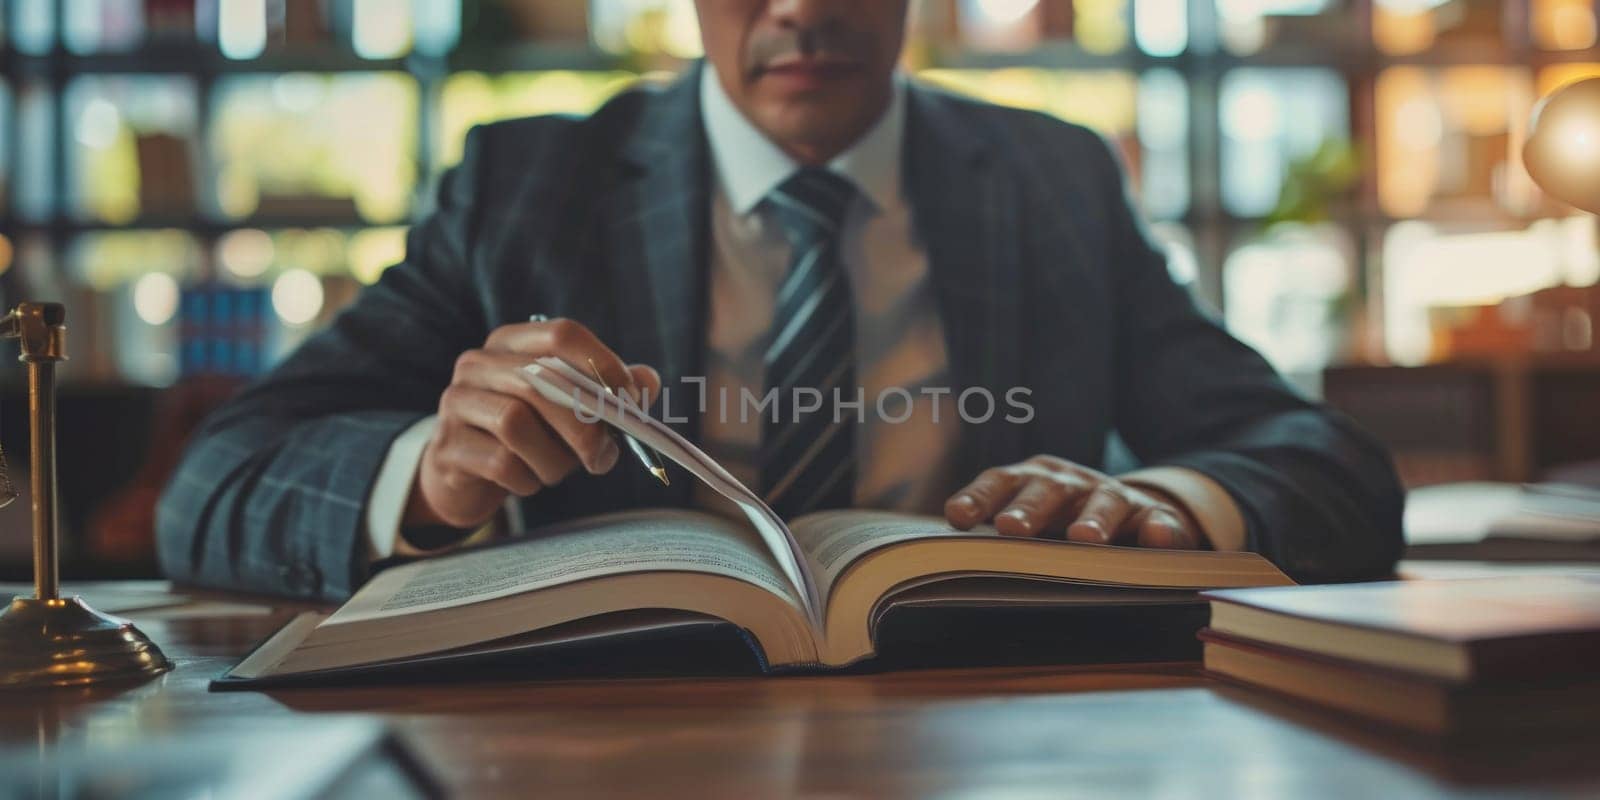 A lawyer in a suit is writing in a book by itchaznong